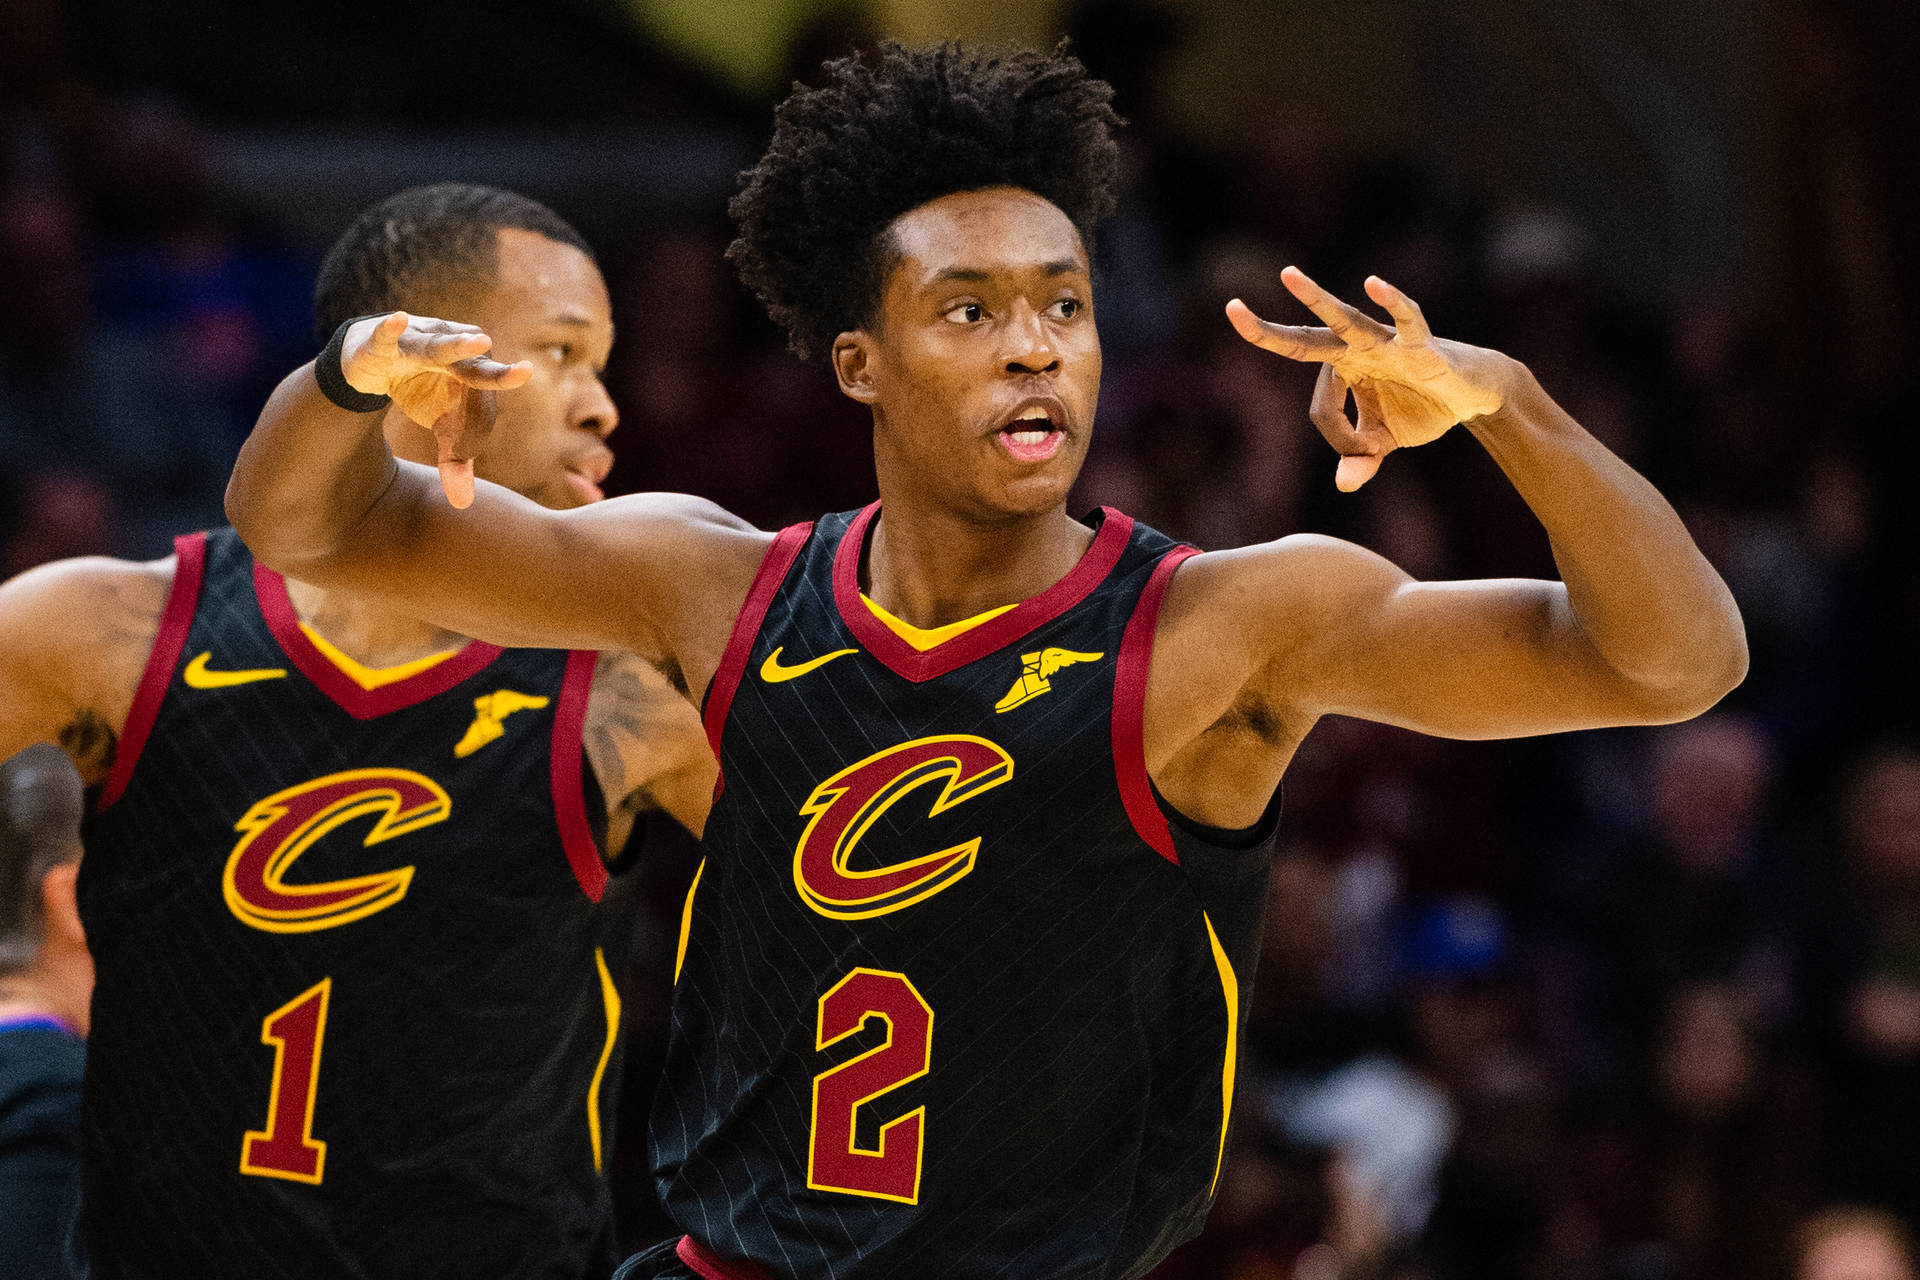 Collin Sexton Making a Three-Point Sign in a Basketball League. Wallpaper